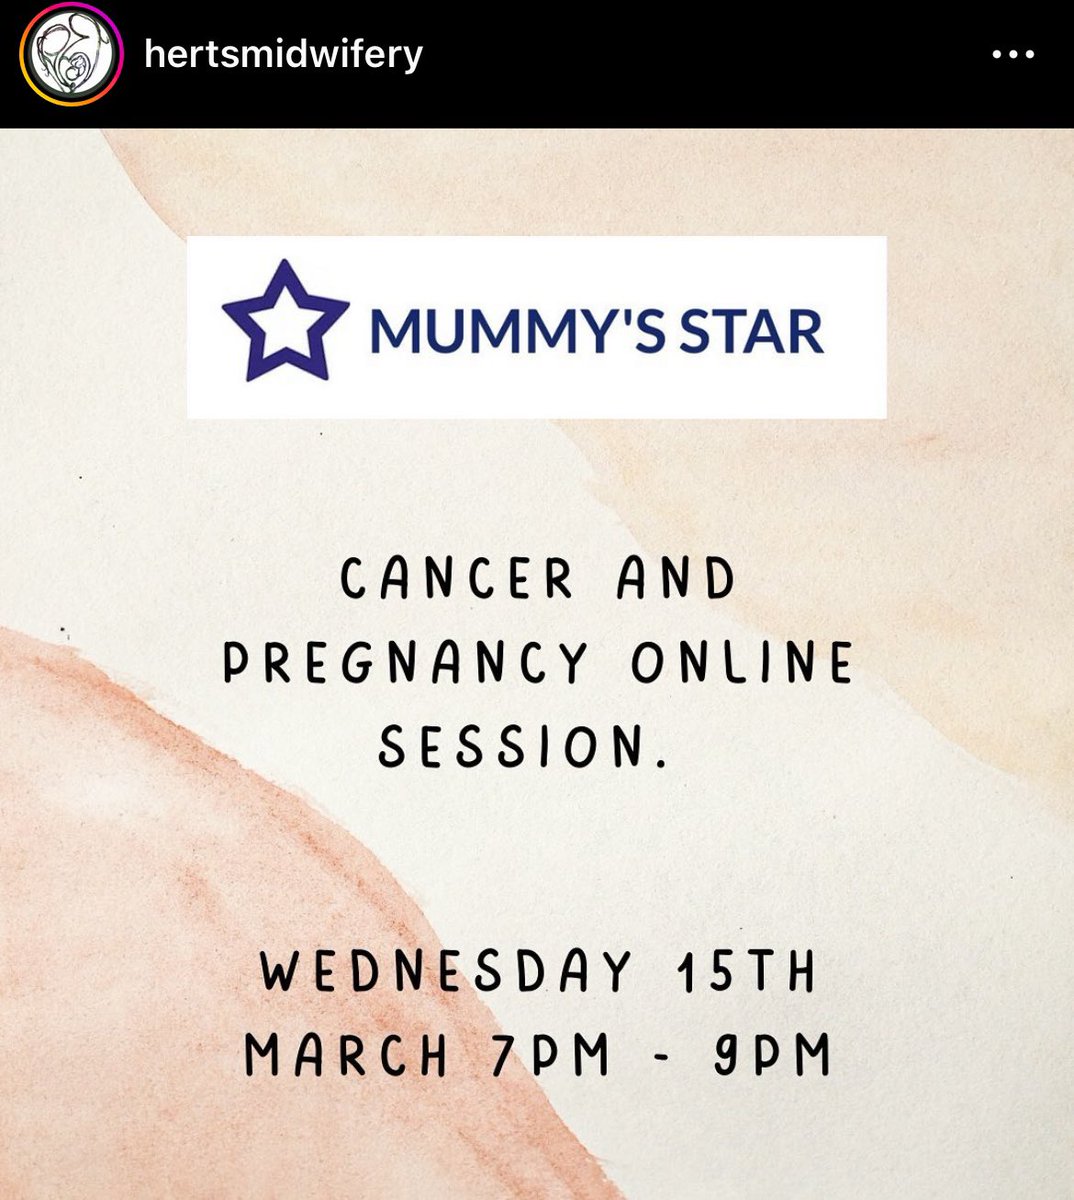 The second Cancer and Pregnancy education session of the week tonight after @BUmidsoc yesterday in Wrexham. 
See you all this evening @hertsmidwifesoc